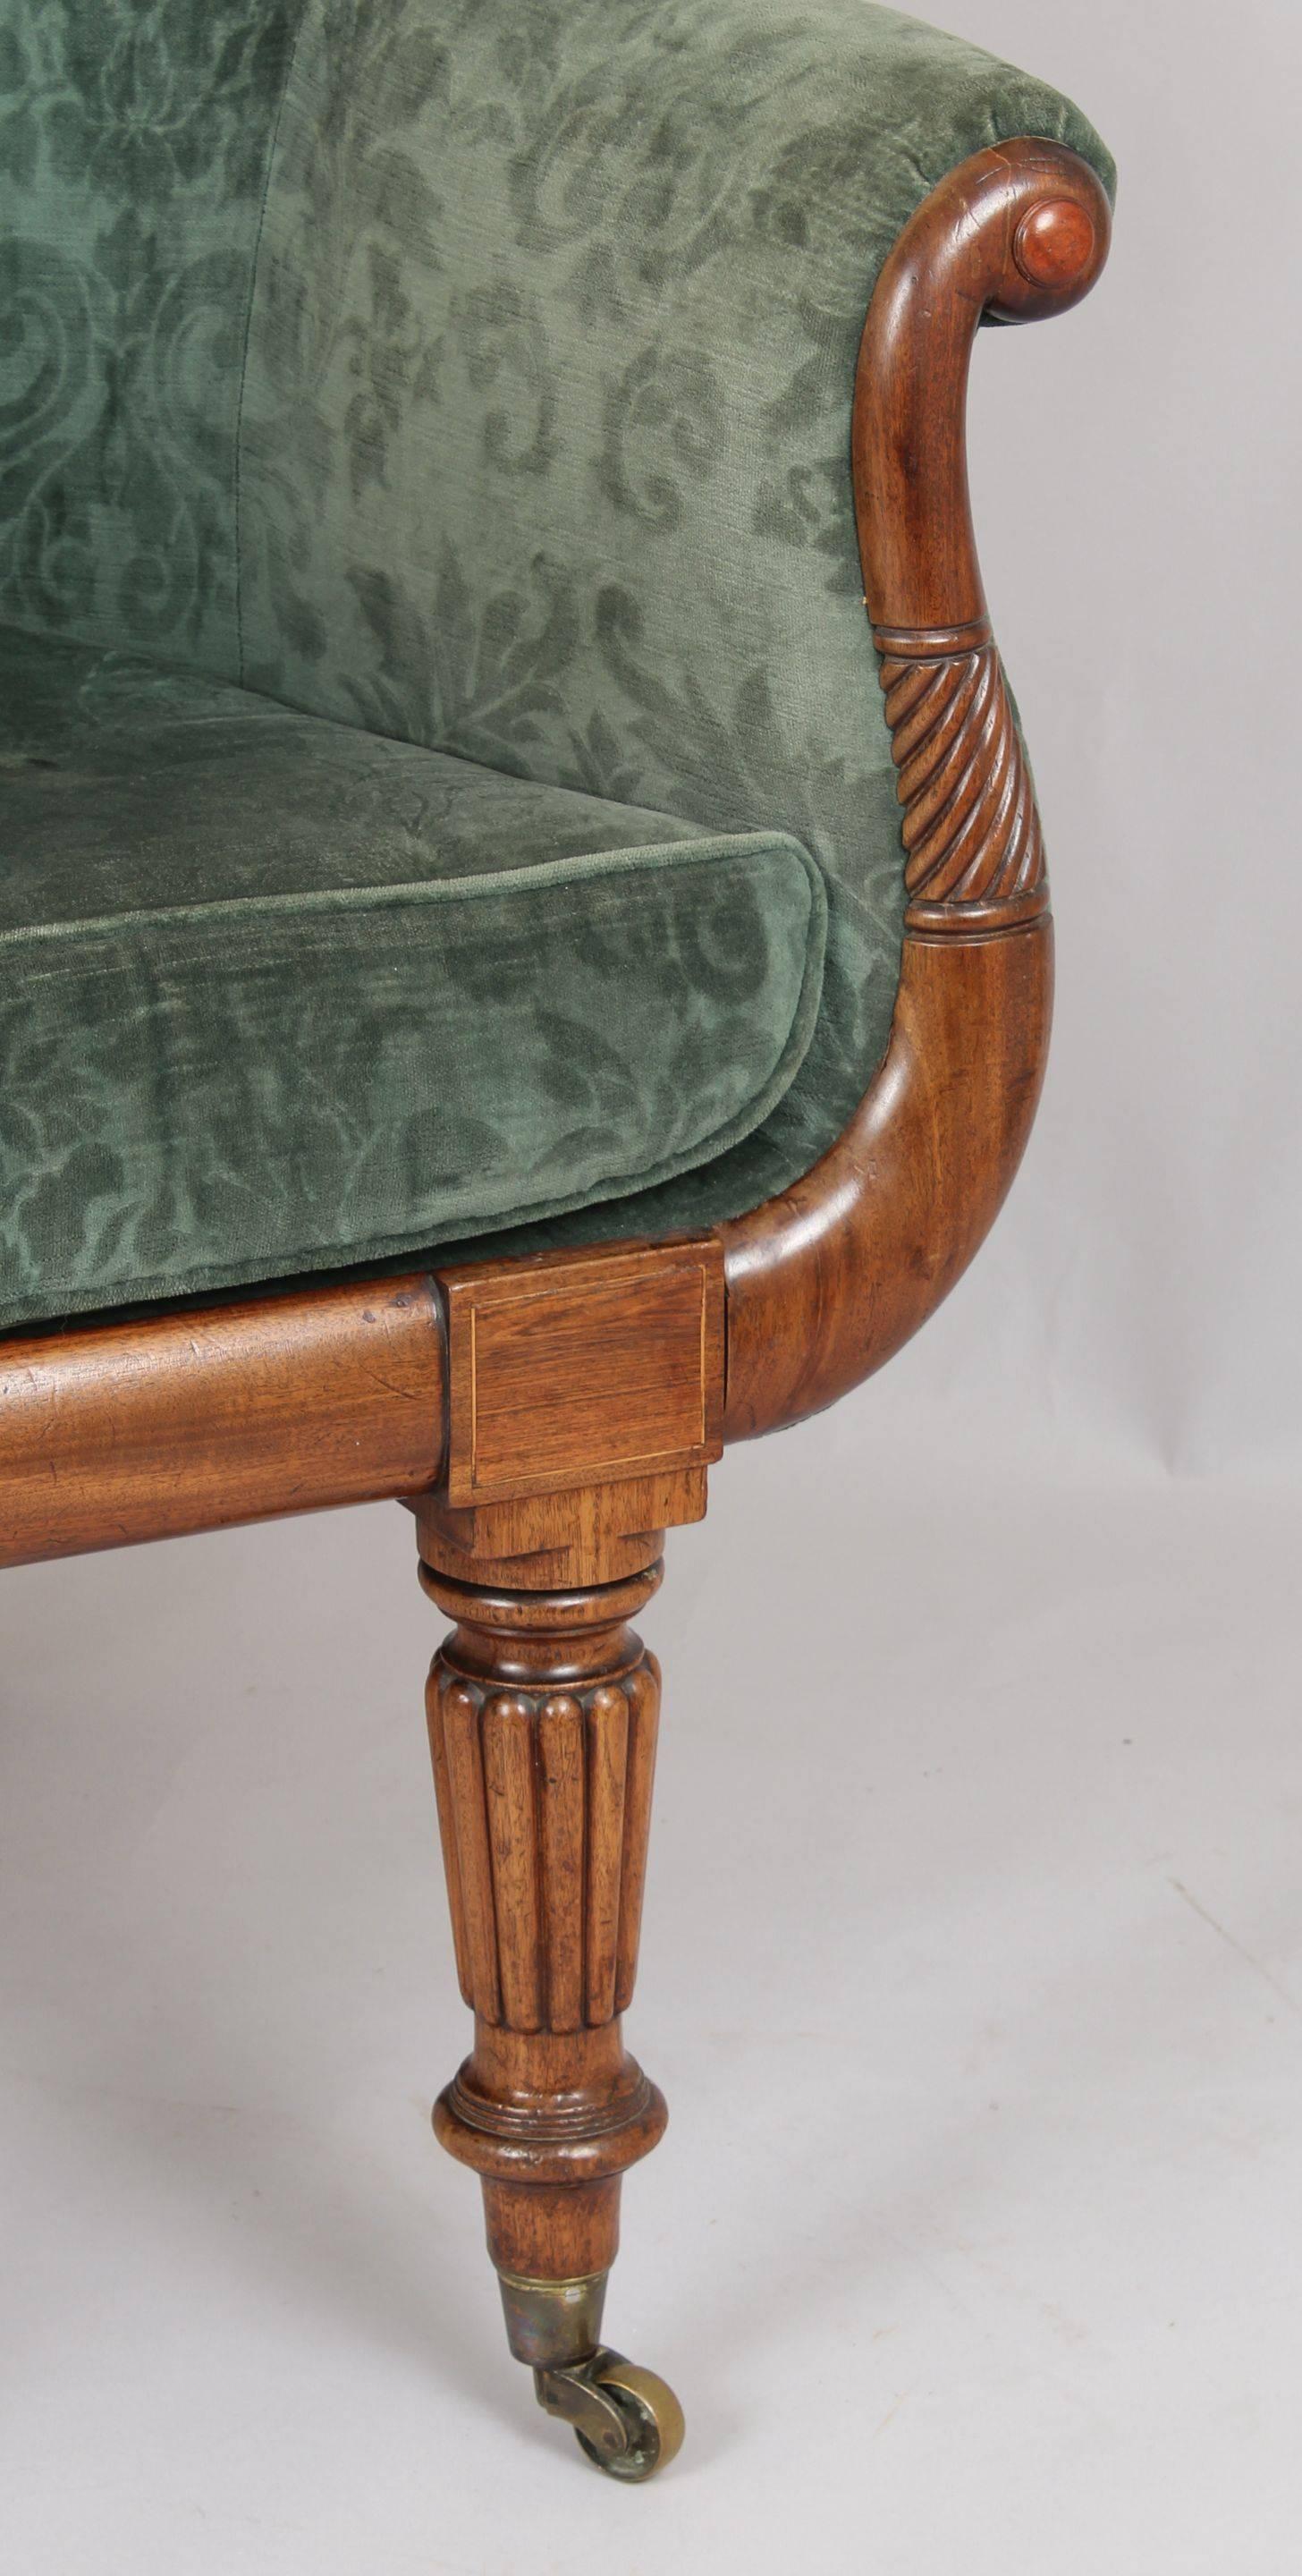 William IV period tall-backed easy-chair; the fully-upholstered curved back and squab seat covered in dark green patterned velvet; with scrolled and spiralled mahogany arm-facings and bold turned and reeded fore-legs with brass cup-castors.